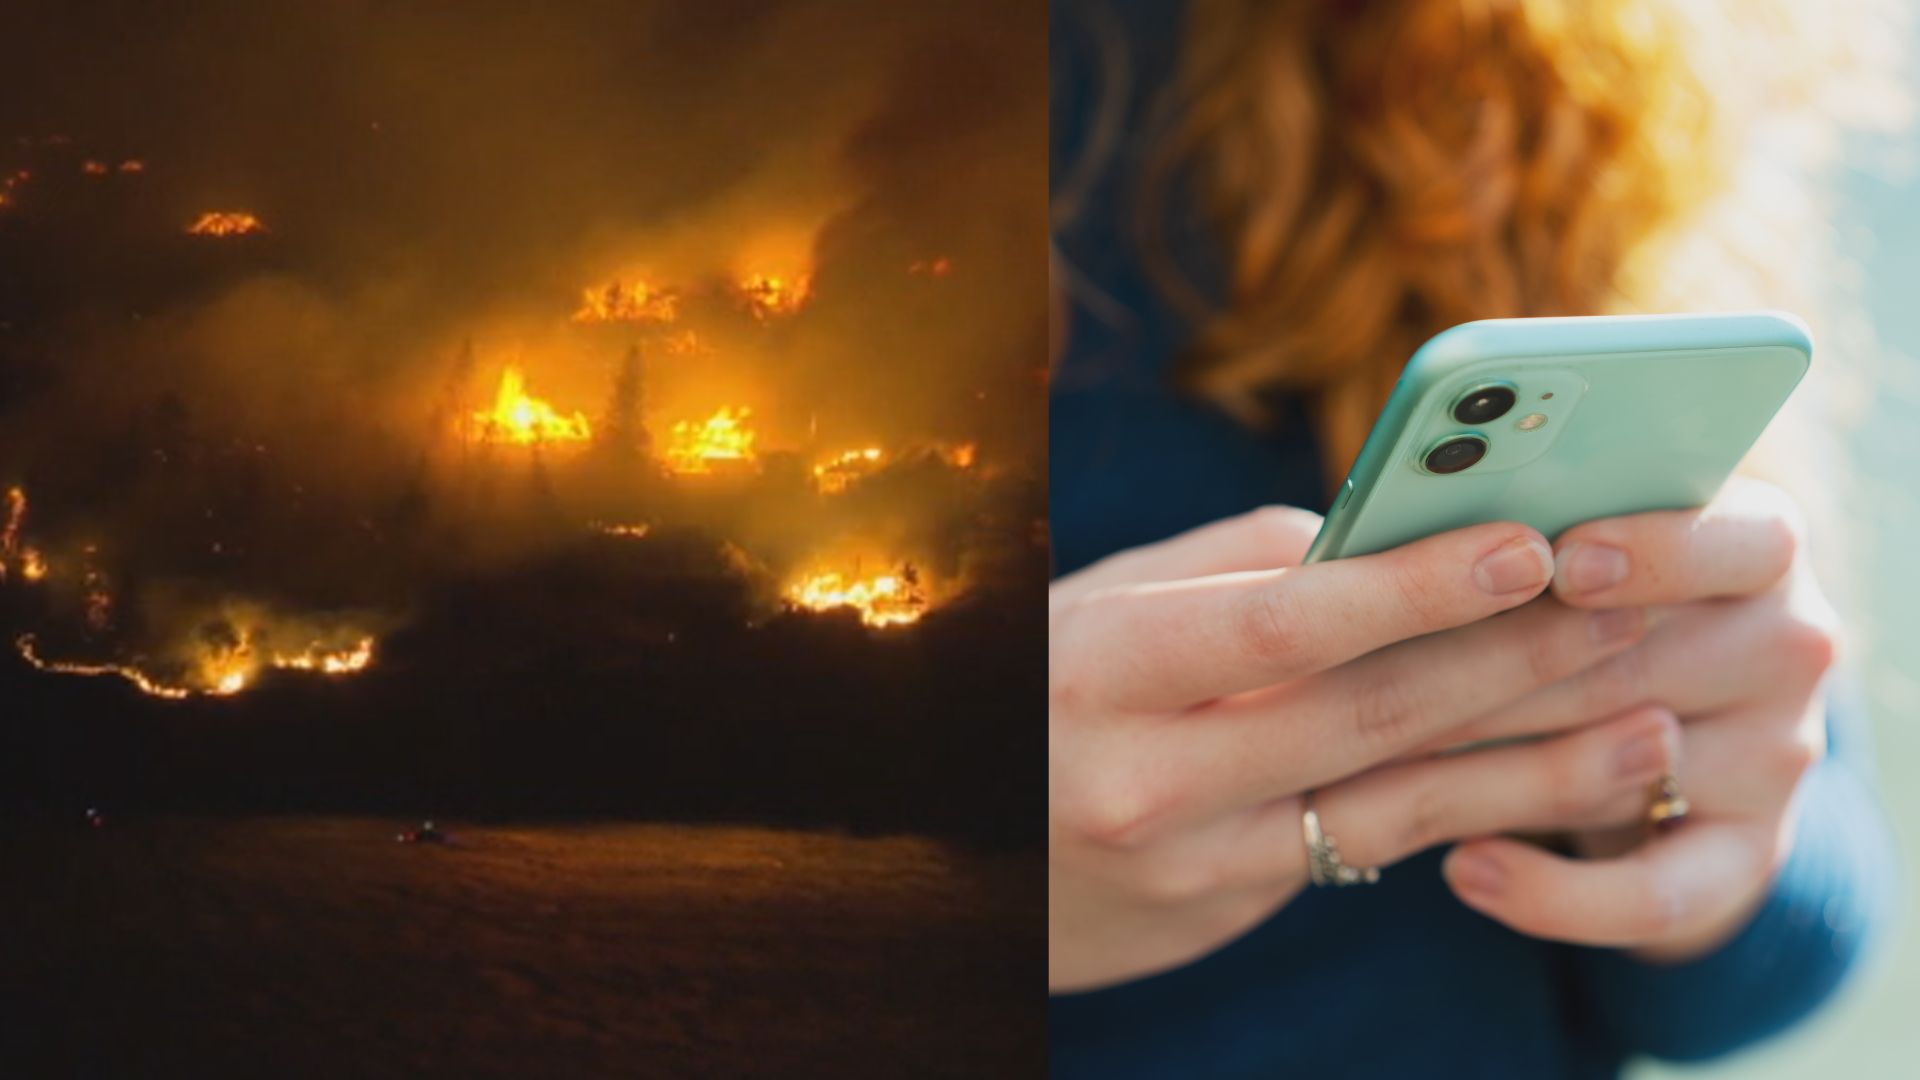 Be ready ‘for anything’ after wildfires hit telecom lines,
official warns